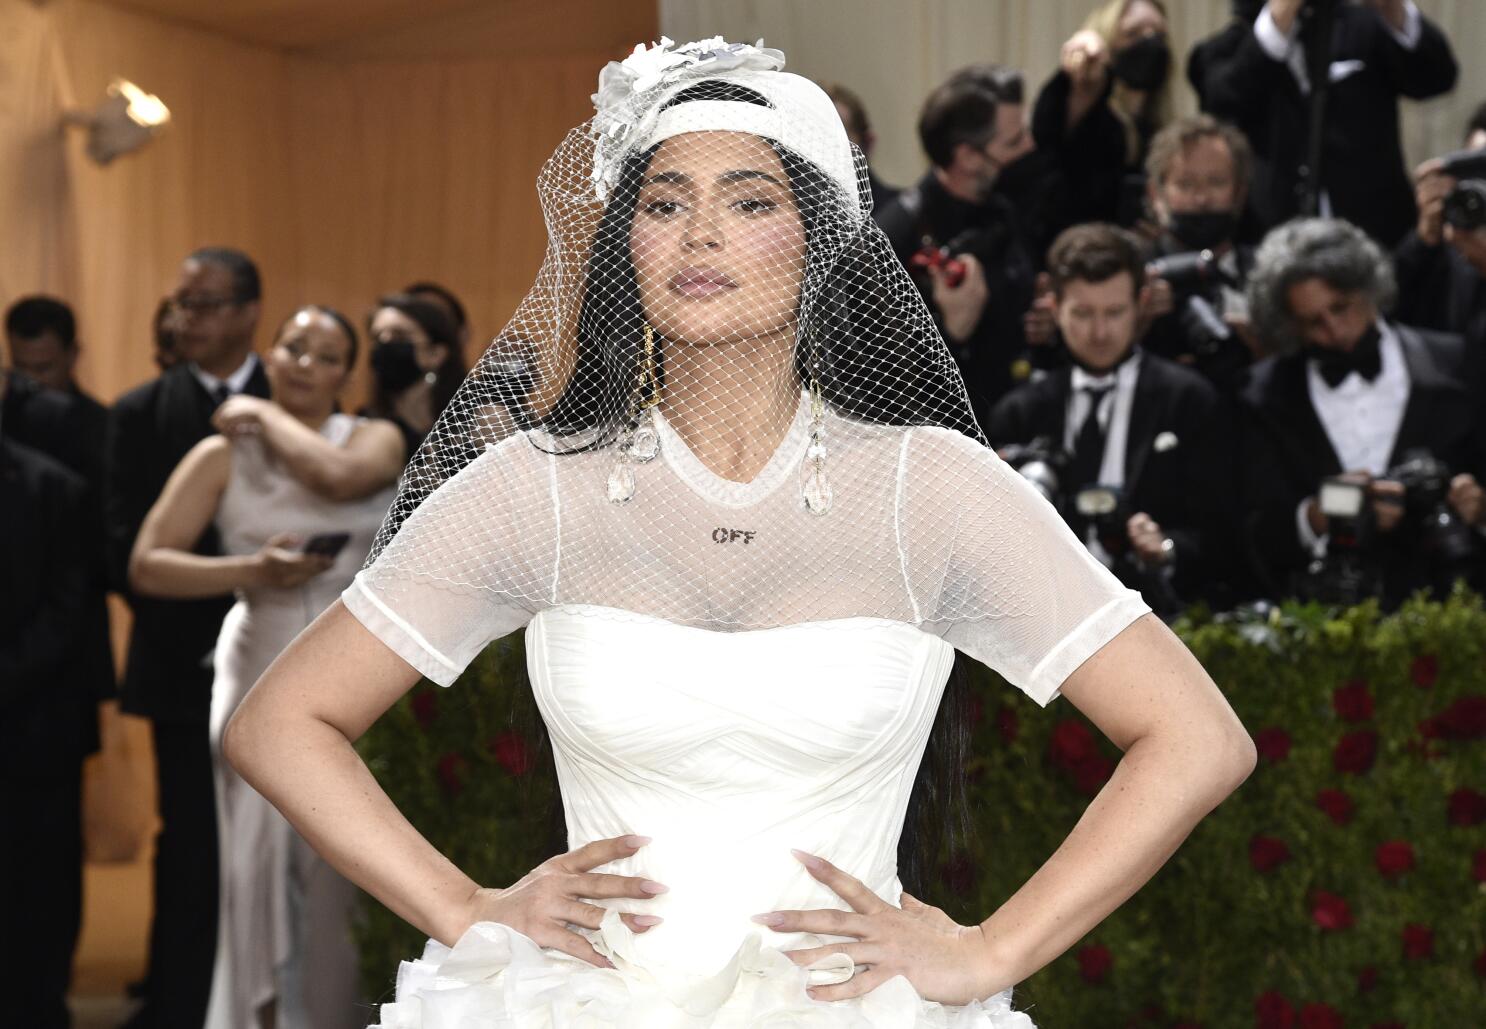 Kylie Jenner just responded to all that Met Gala backlash